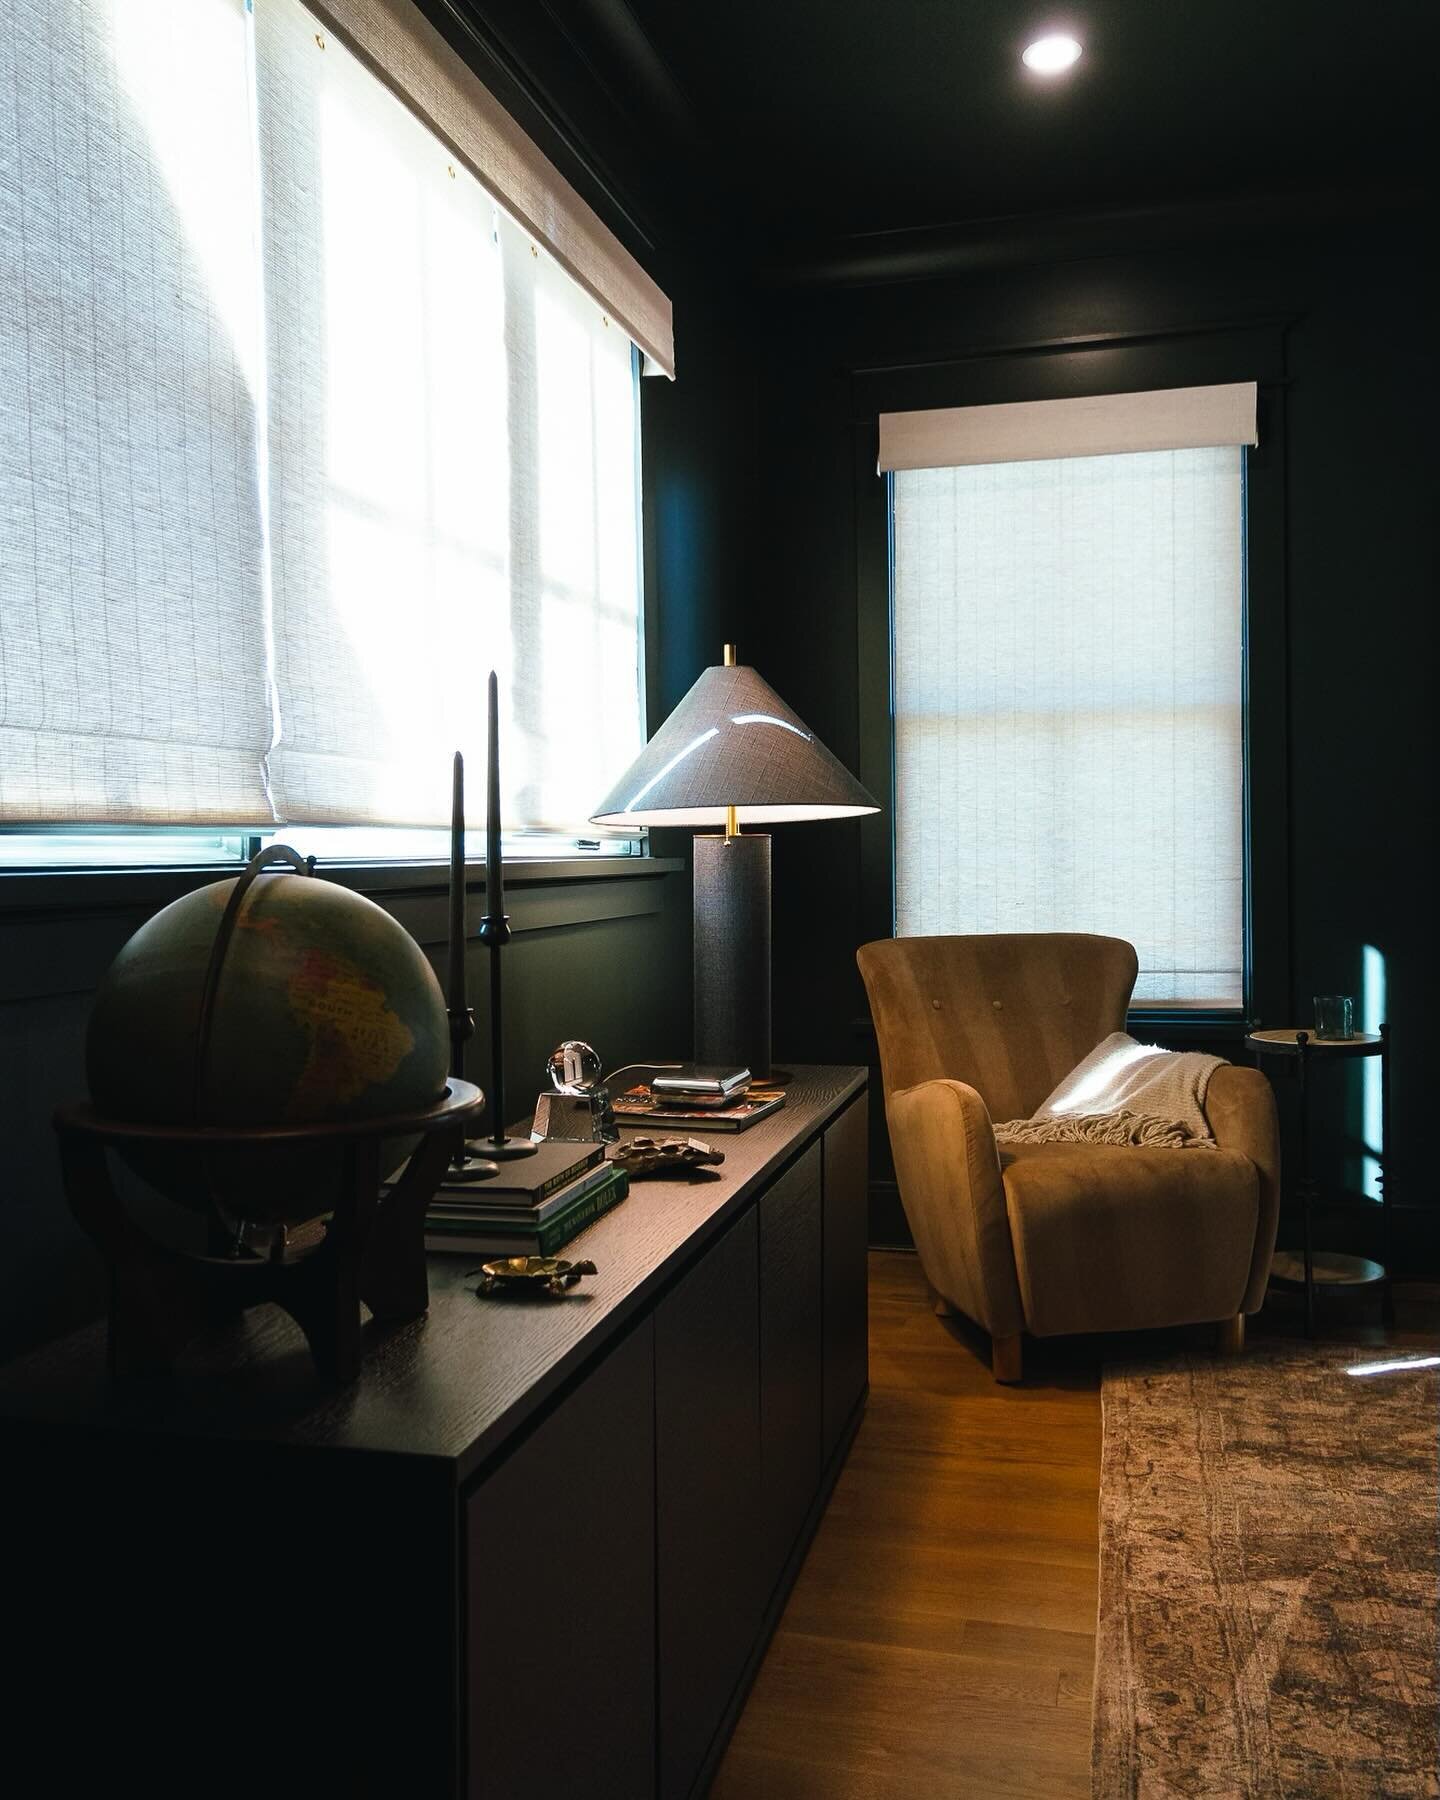 Sitting in my 75% finished office daydreaming of this home office we just finished painting a couple of weeks ago. Loving the moody vibe that my client refers to as her &ldquo;Wednesday Addam&rsquo;s aesthetic&rdquo; 

This project in Green Hills is 